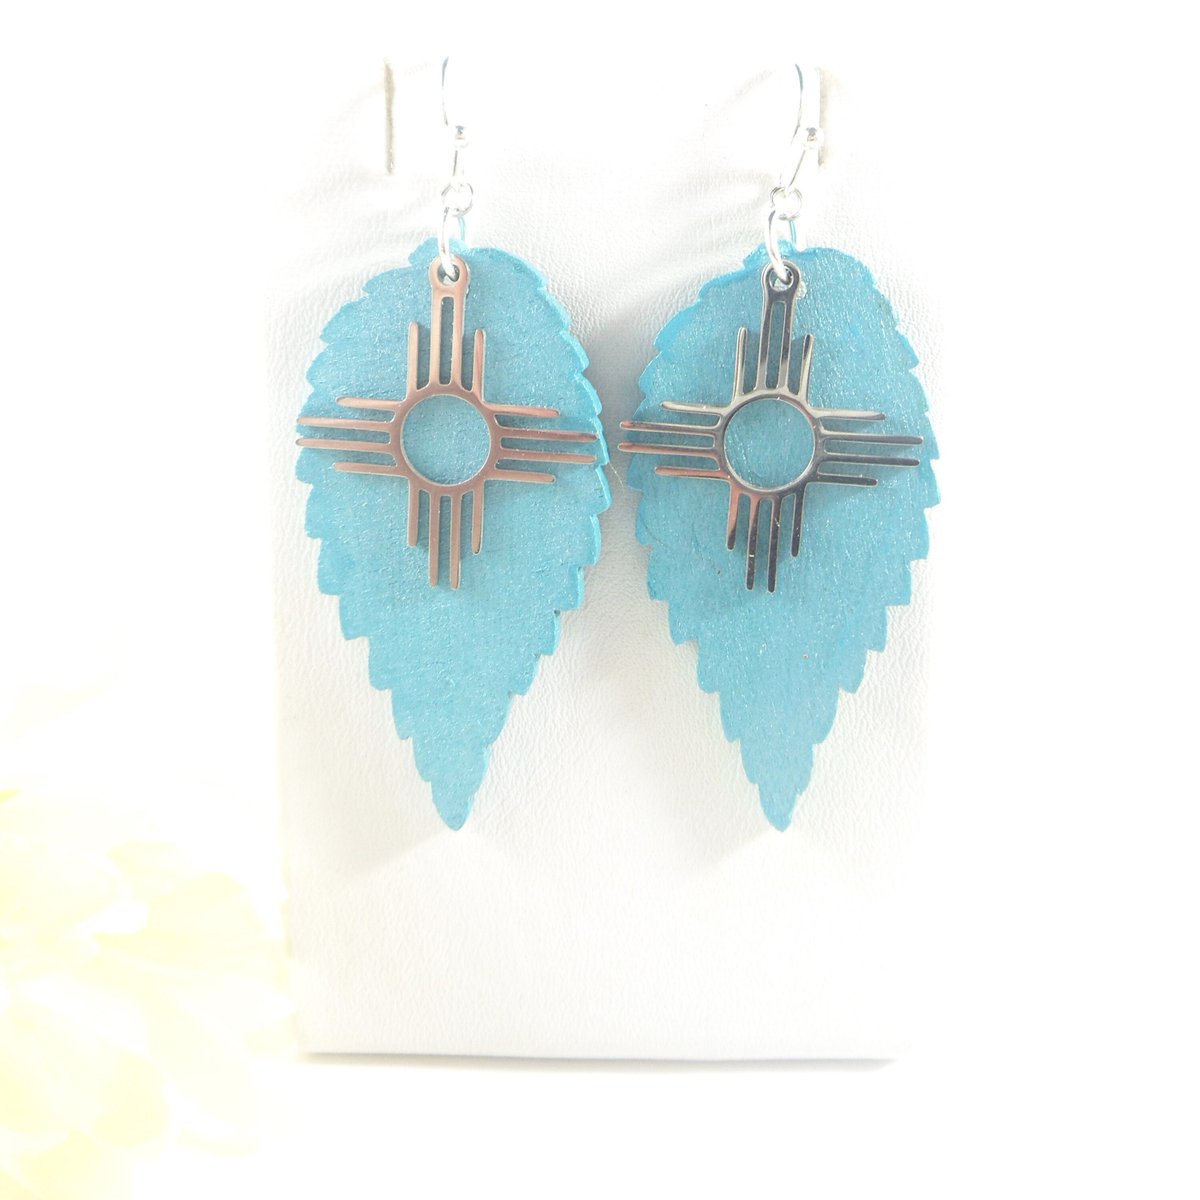 Zia Earrings Turquoise Hand Painted Silver Stainless Steel Santa Fe New Mexico Unique Southwestern Jewelry NM Zia Symbol Albuquerque Jewelry tuppu.net/f1e15f45 #EtsySeller #EtsyShop #NewMexico #SantaFe #NewMexicoStyle